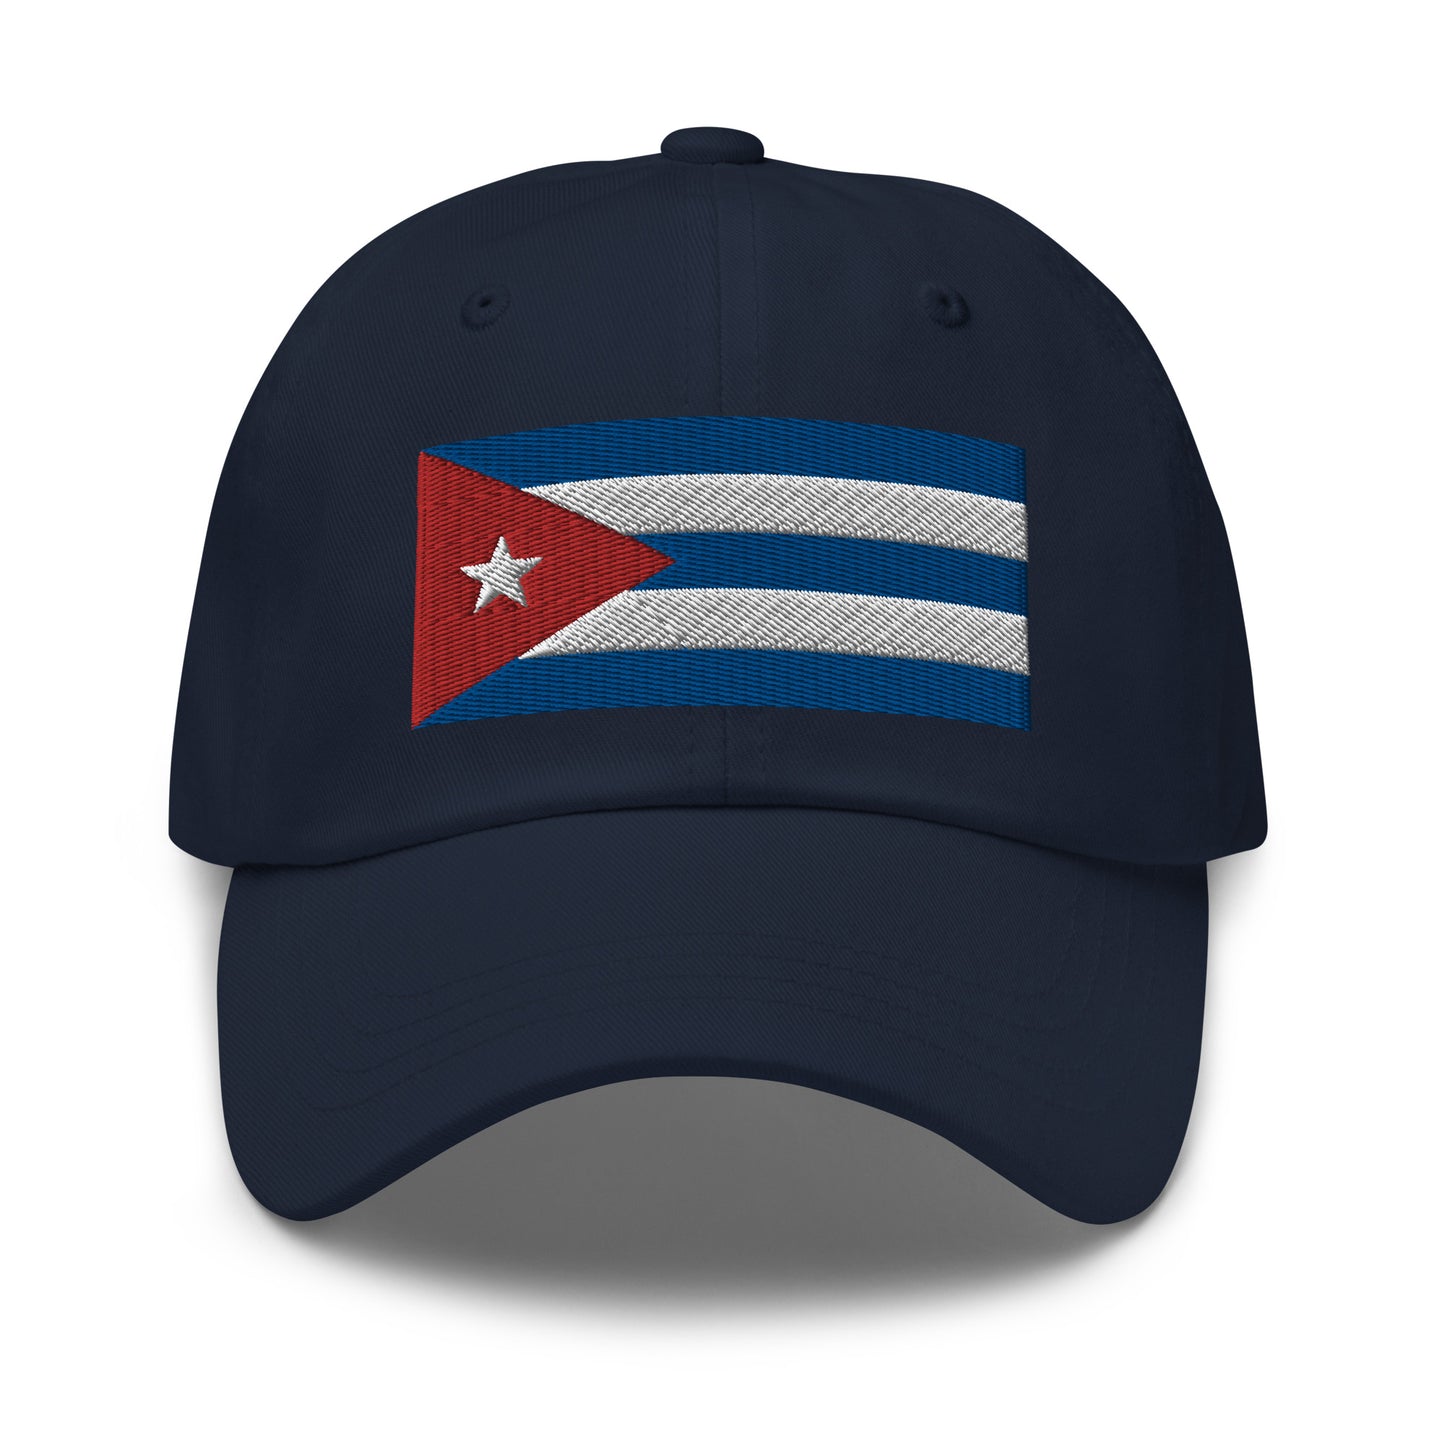 Embroidered Dad Hat for Cuba Enthusiasts: Dad hat featuring the Cuban flag, perfect for anyone who loves Cuba. Navy color hat.